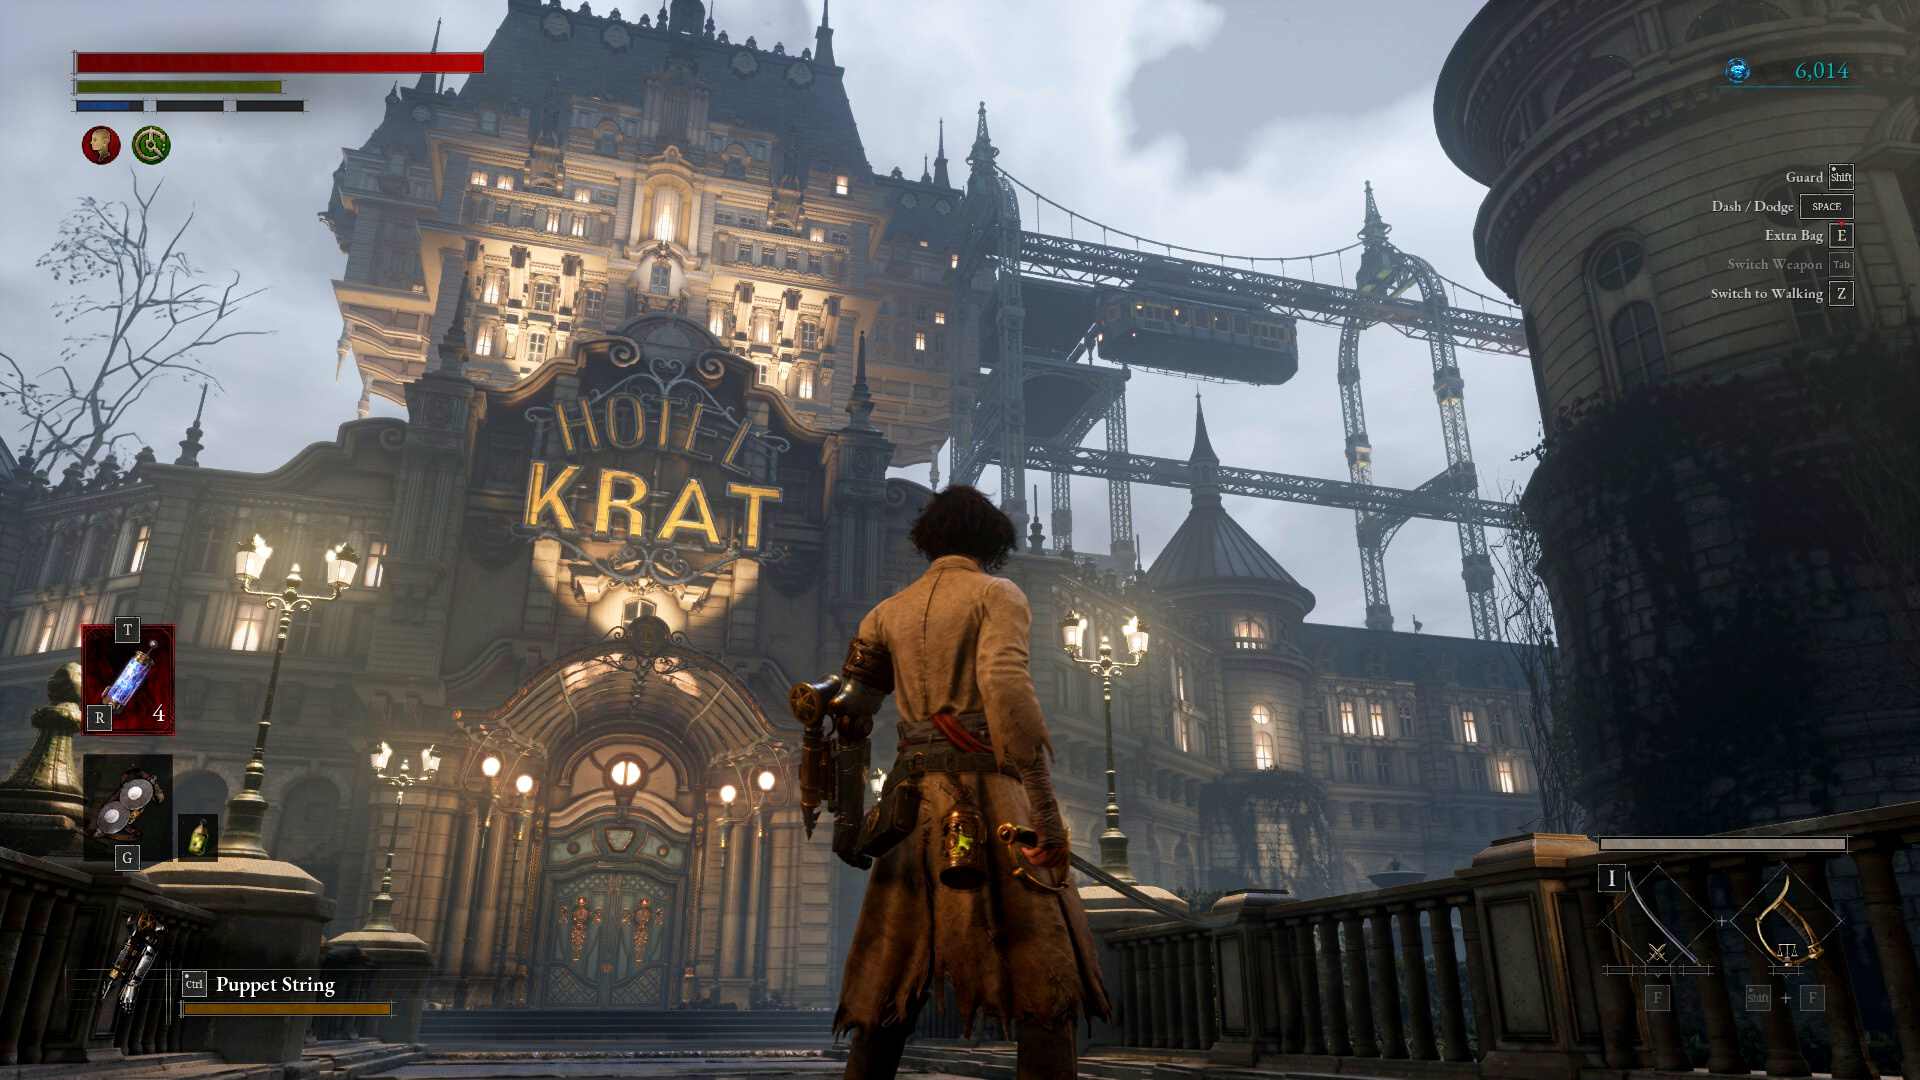 The city of Krat featured in the demo of Lies of P features consistent design and high-quality ambience.